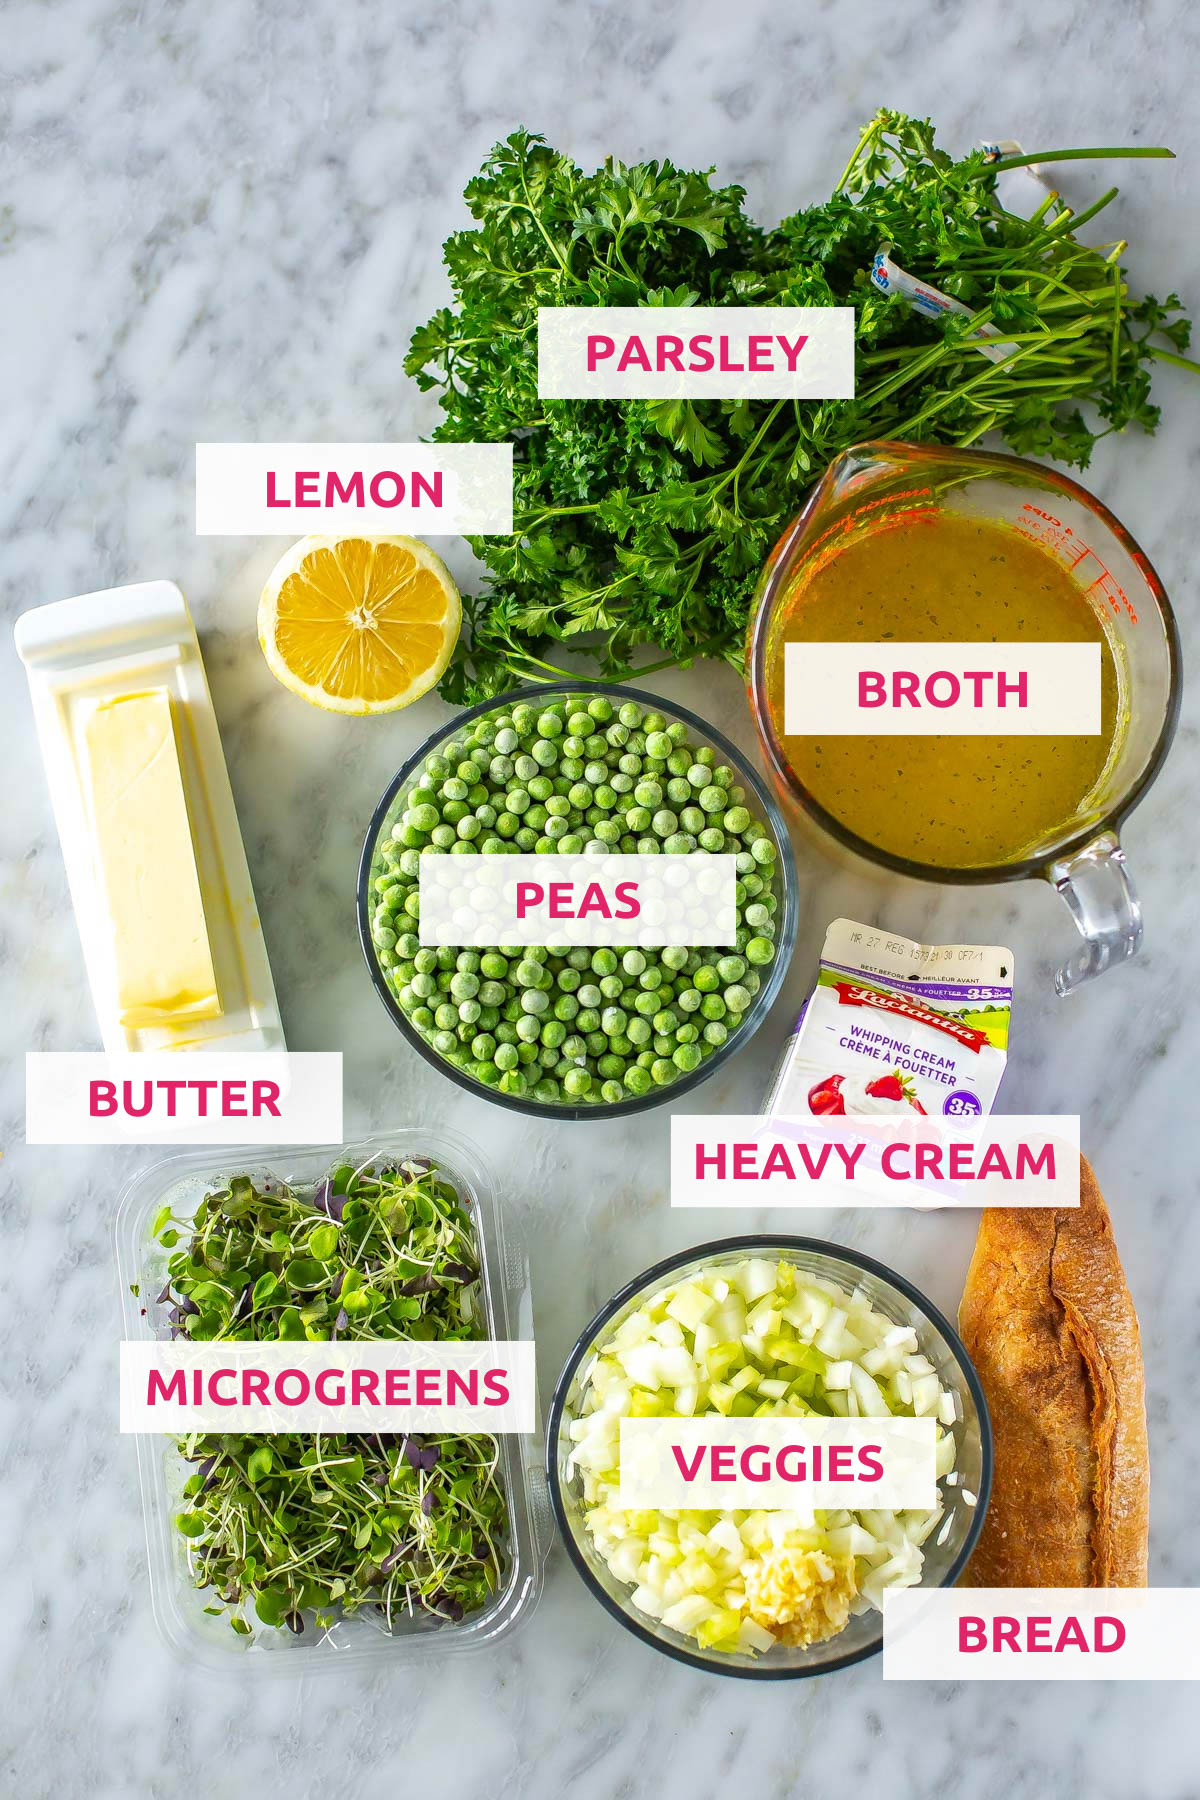 Ingredients for spring green pea soup: peas, parsley, broth, veggies, heavy cream, microgreens, butter, lemon and bread.